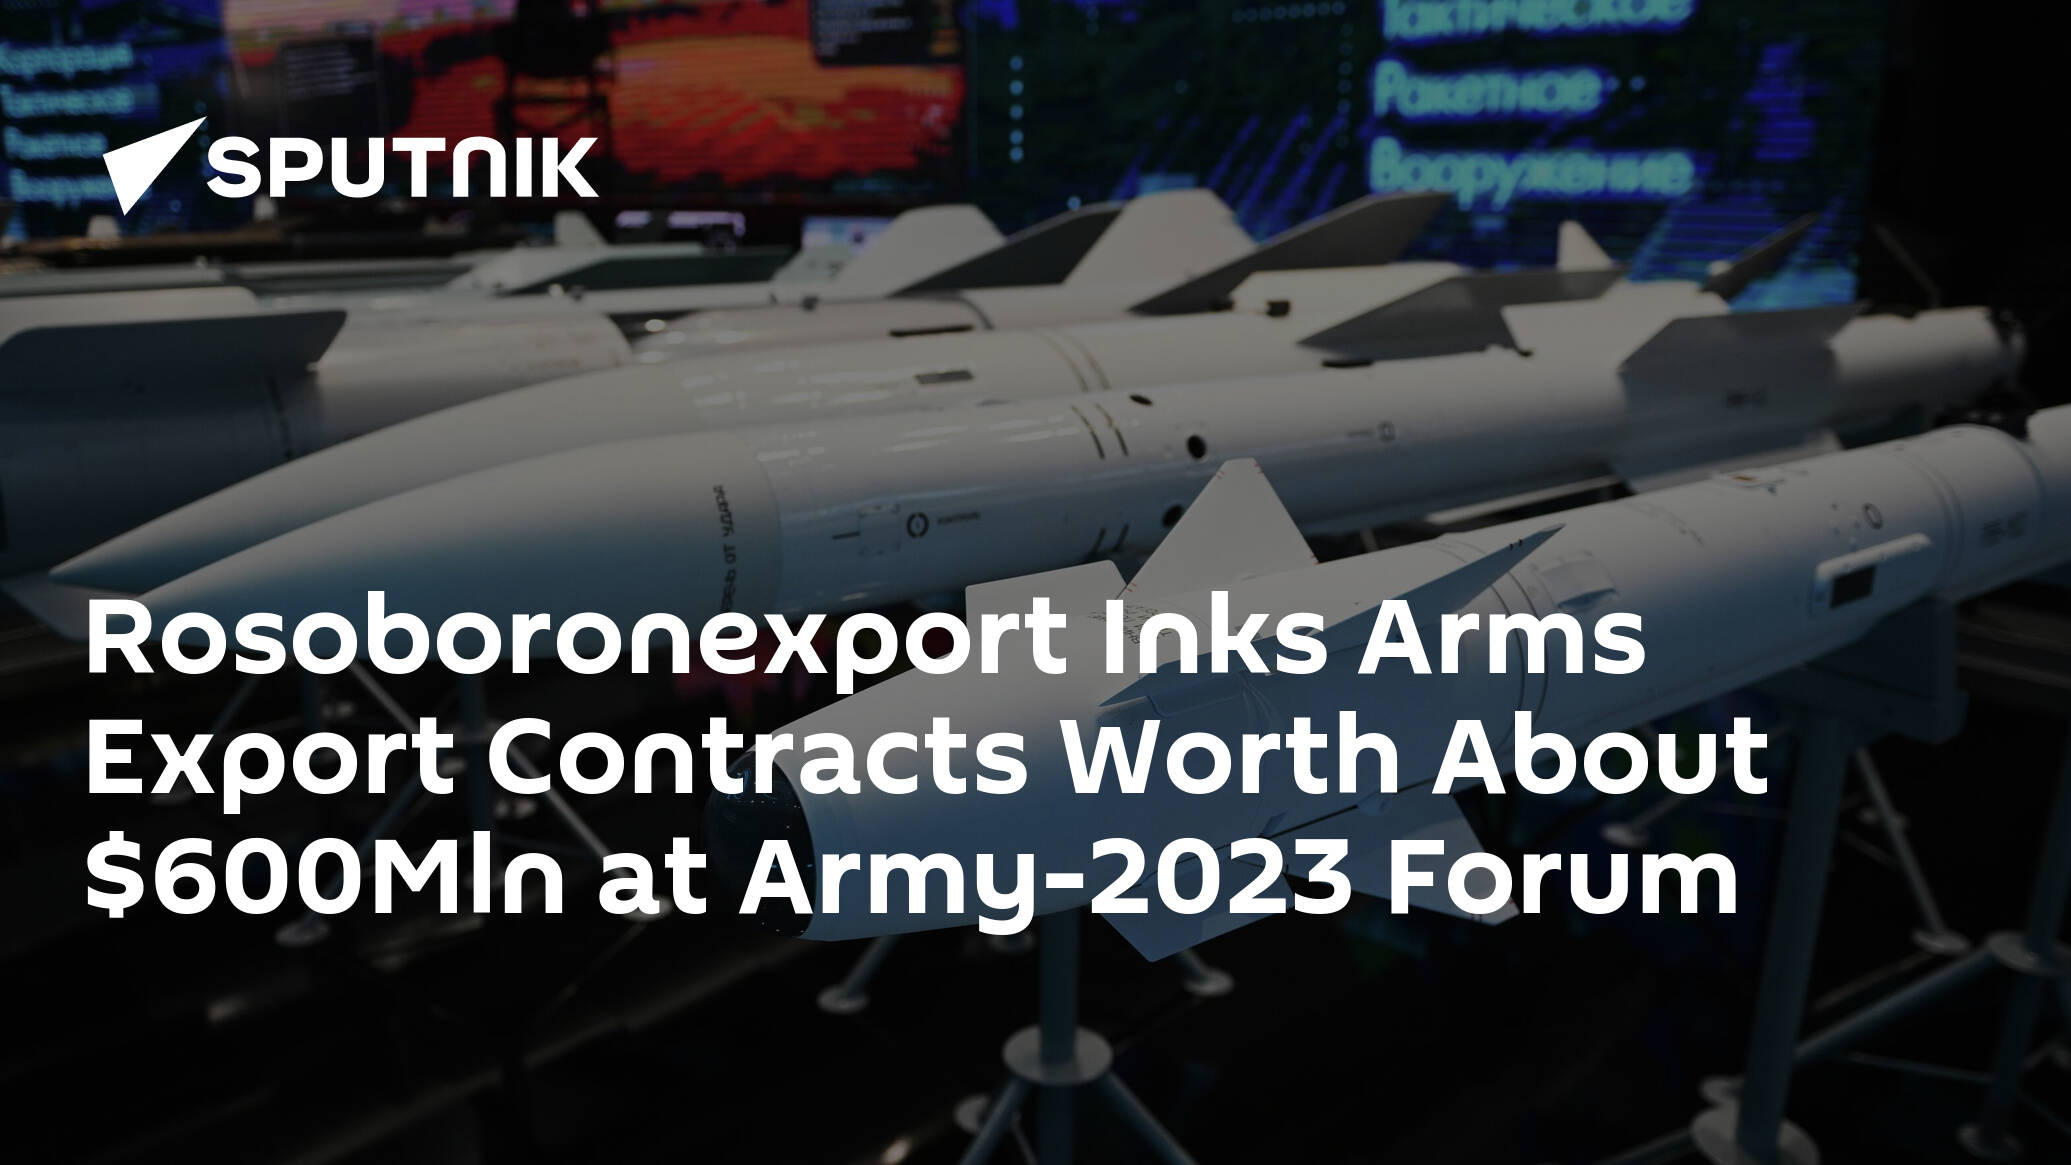 Rosoboronexport Inks Arms Export Contracts Worth About 0Mln at Army-2023 Forum